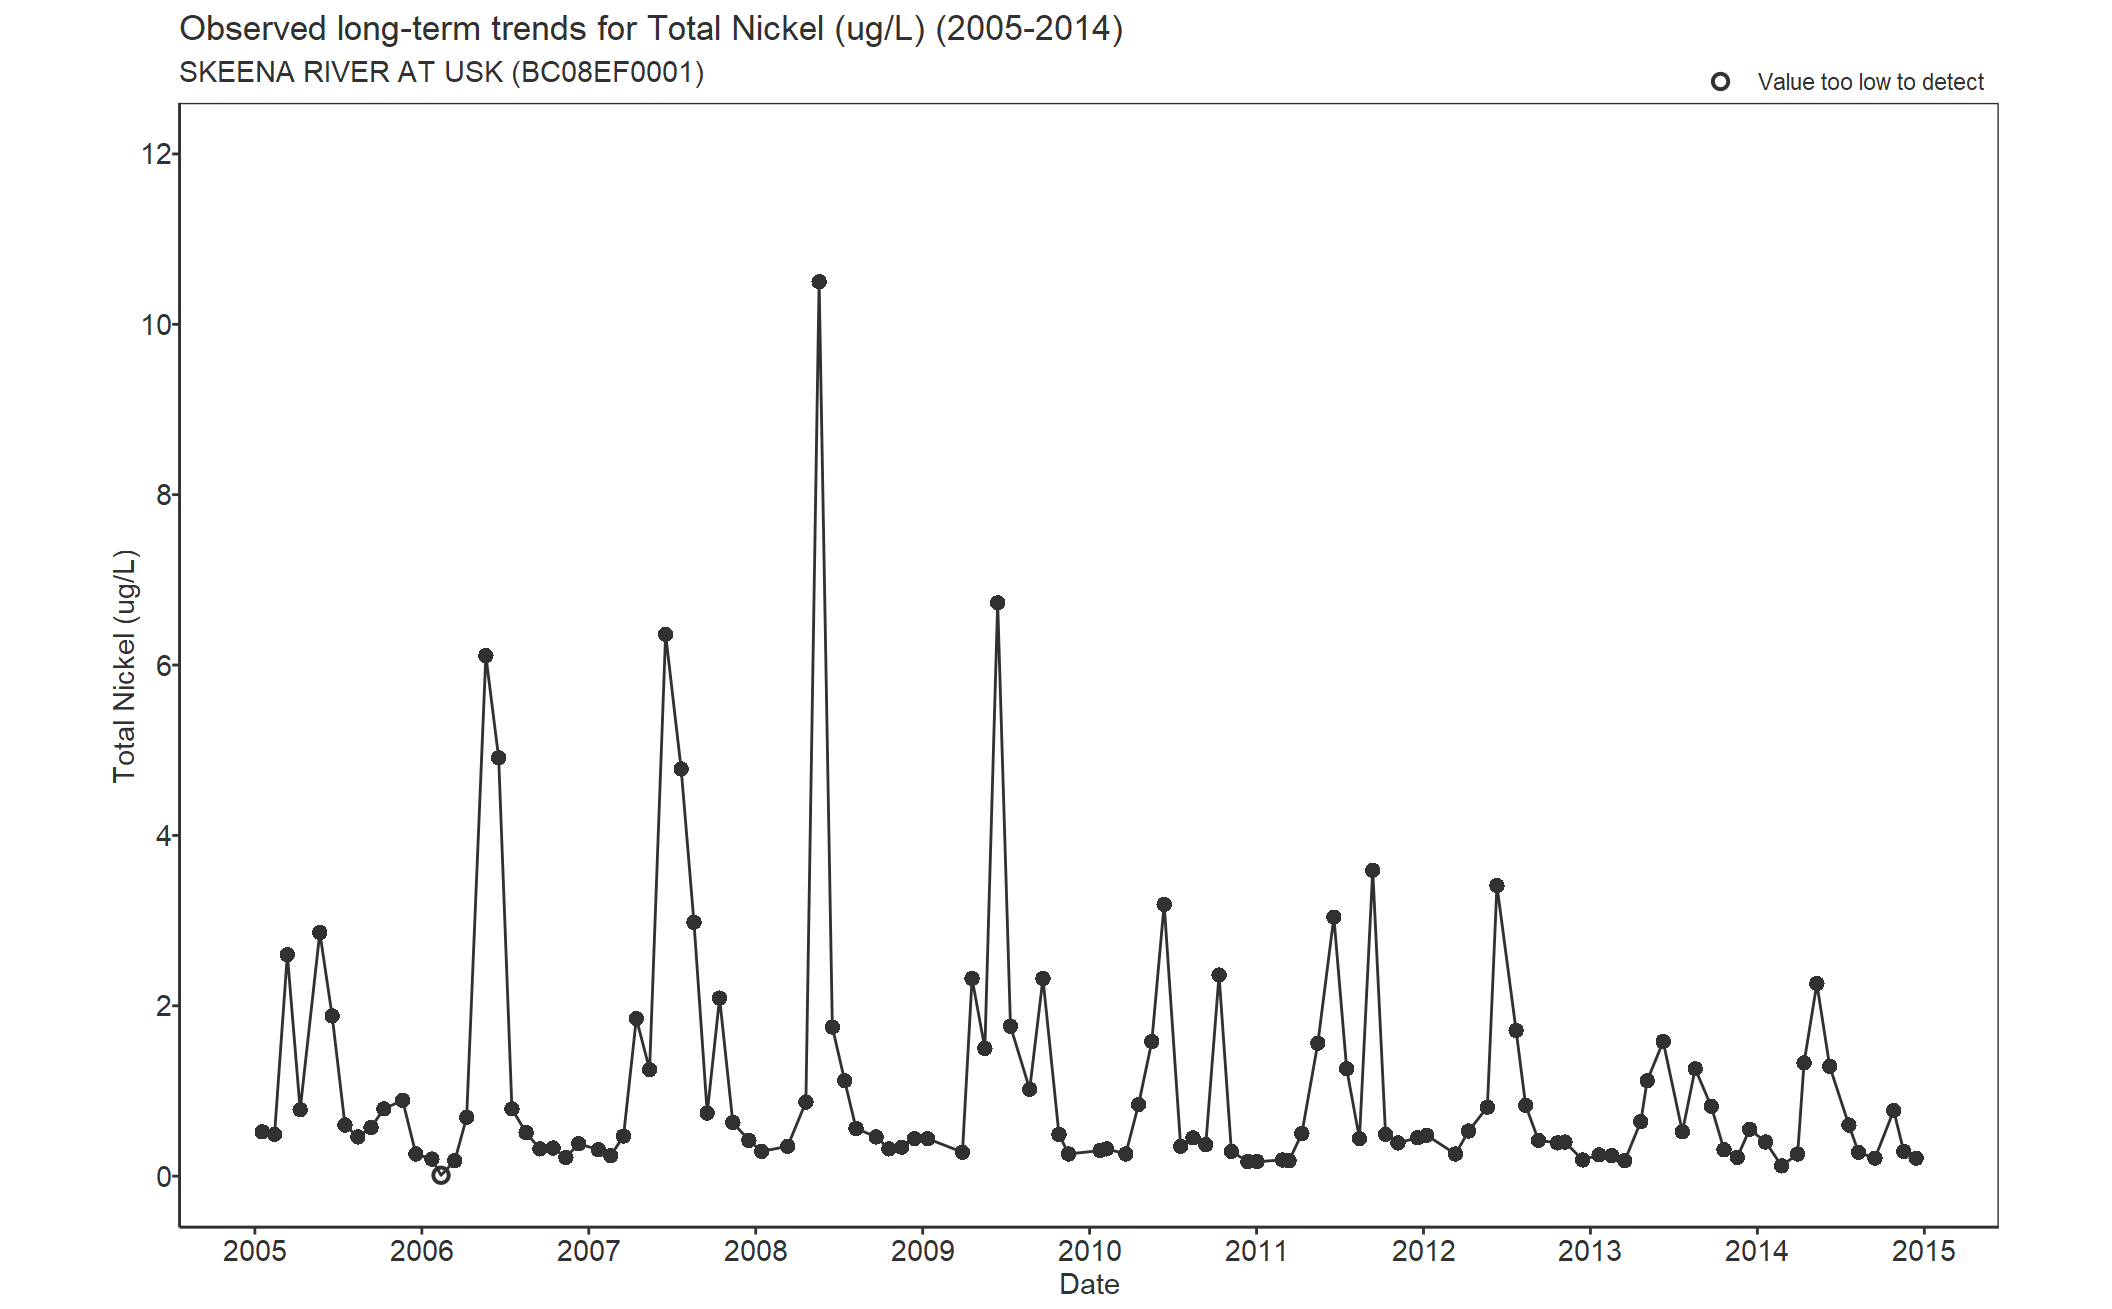 Observed long-term trends for Total Nickel (2005-2014)